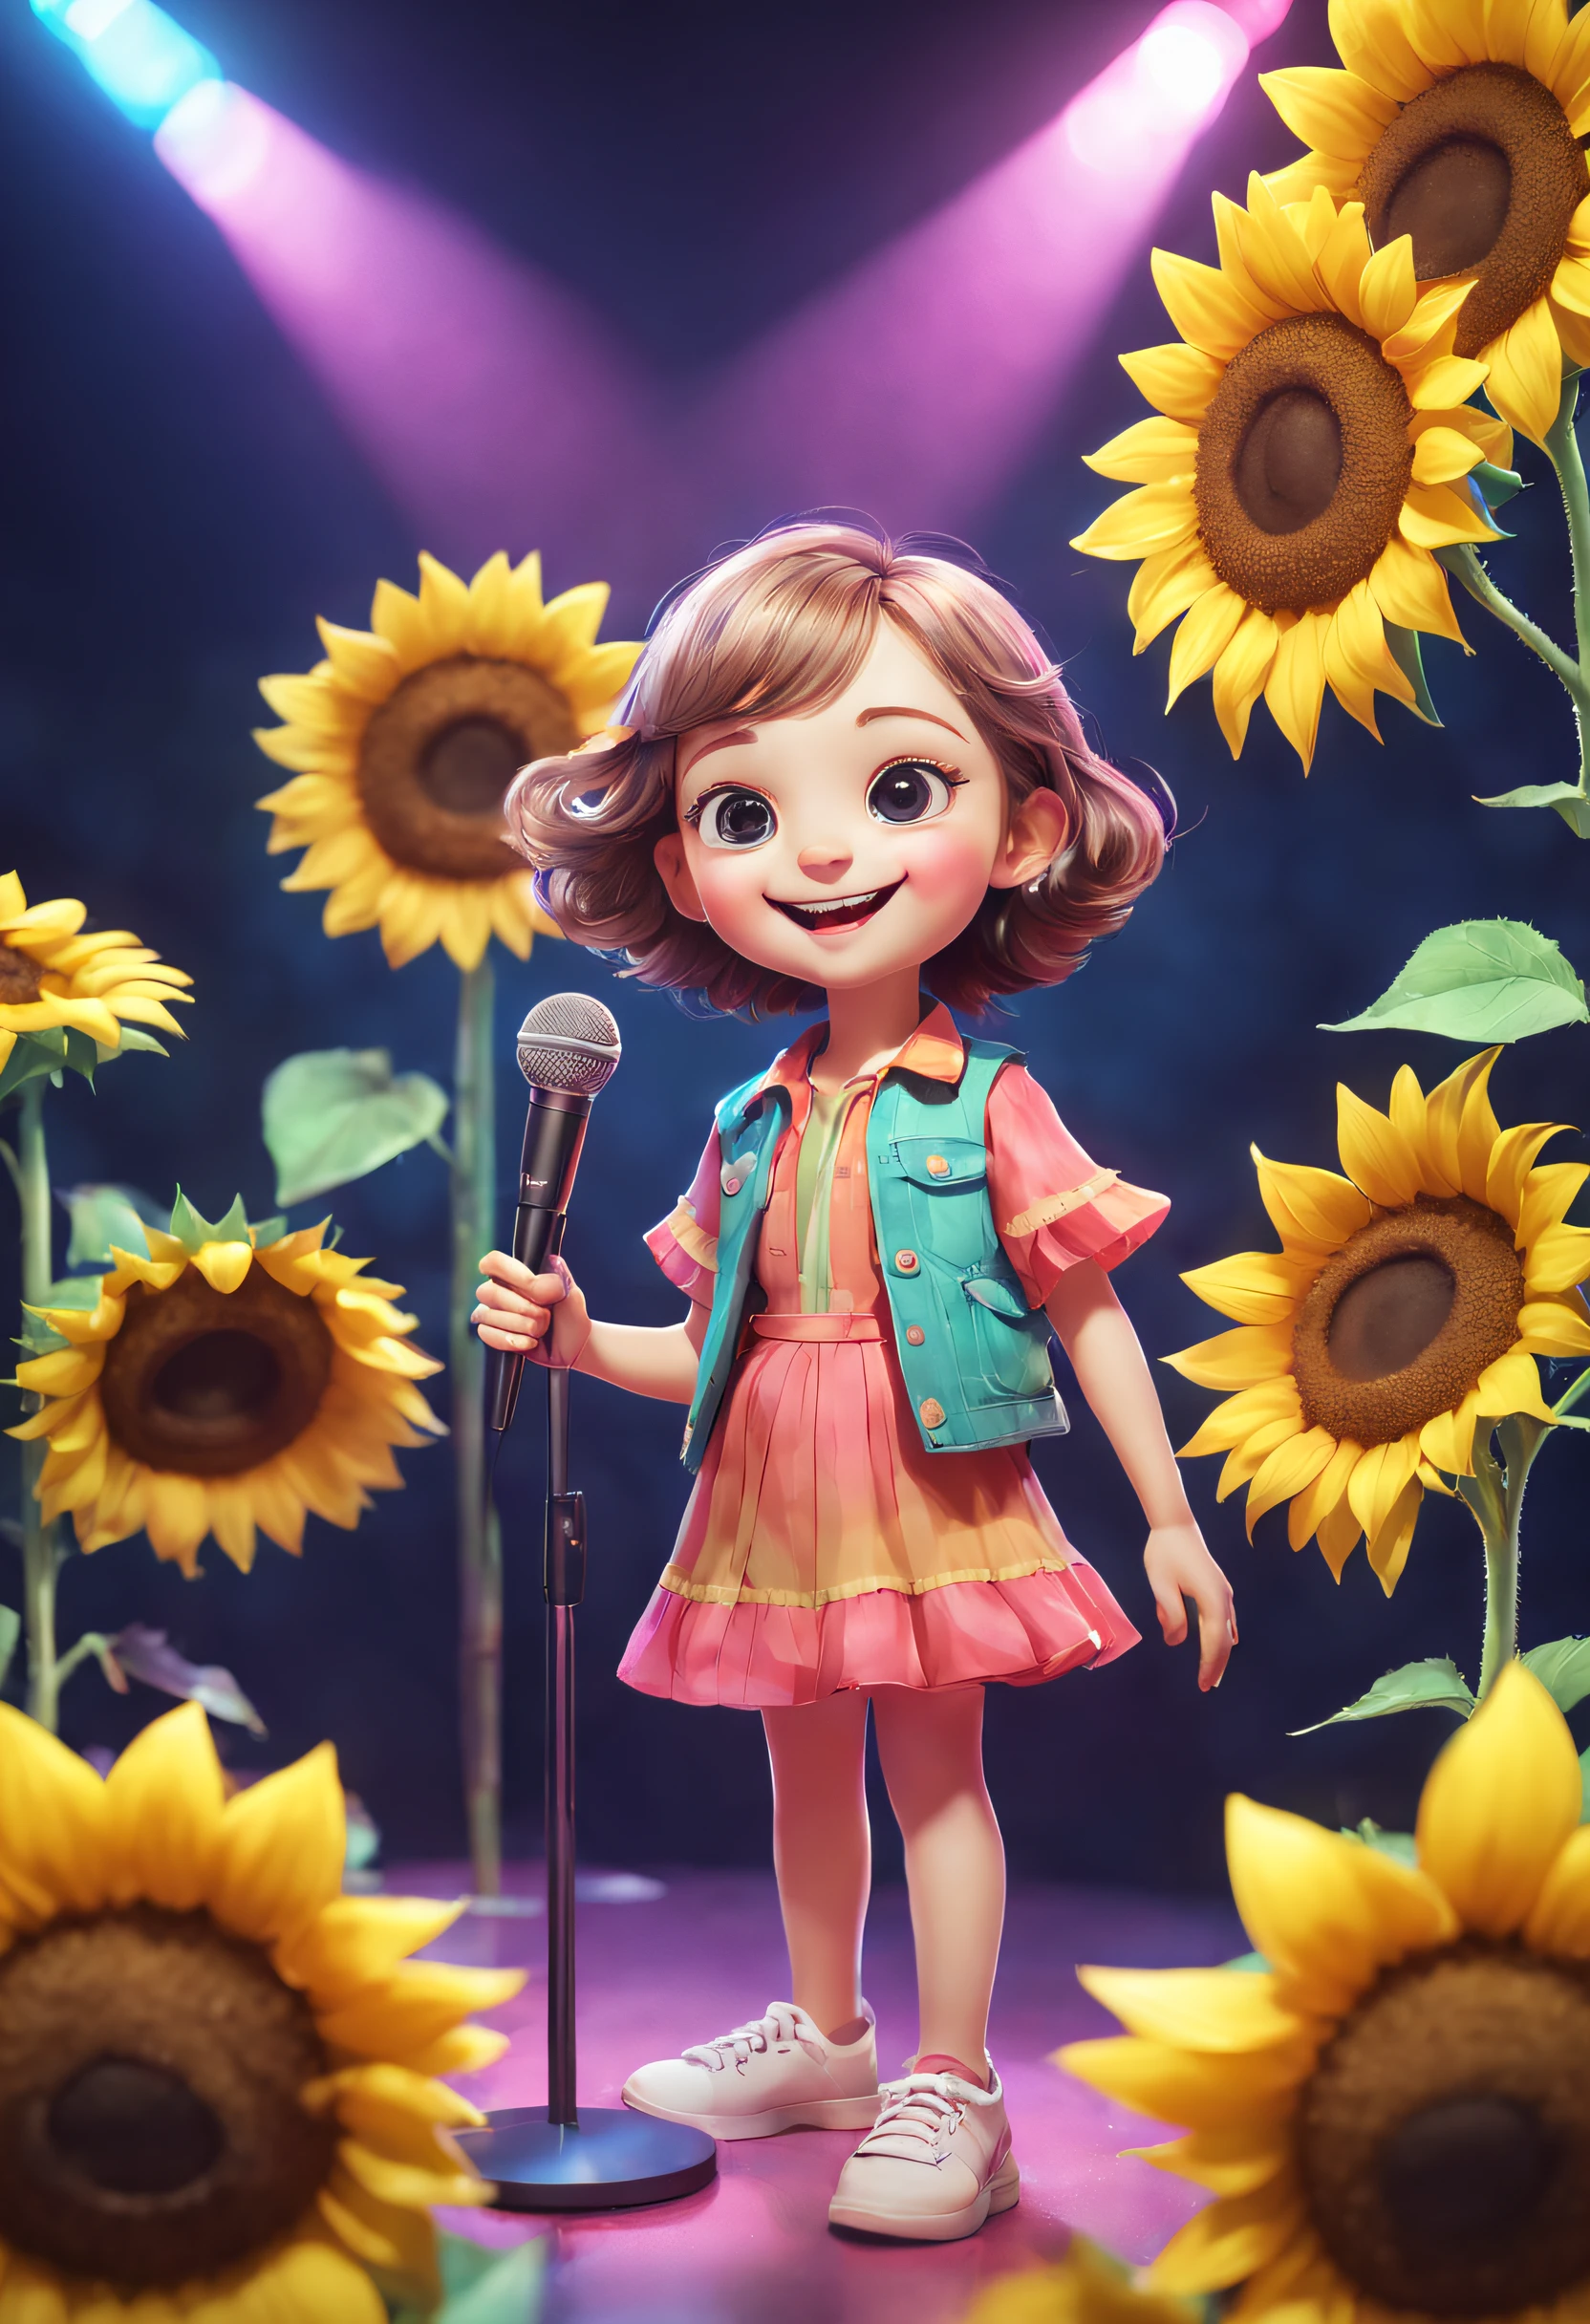 （character  design）， (5 lovely sunflowers，Wearing different colored clothes，stand in front of a microphone and sing,），Holographic Color Set,Smiling, big bright eyes, Background with：stage，neonlight，like a dream，Whimsical，fairytale-like, super detailing, pixal style, vibrant with colors, Natural soft light,, 5 octane rendering, ultra-wide-angle, 8K, High realism，Grand Prix